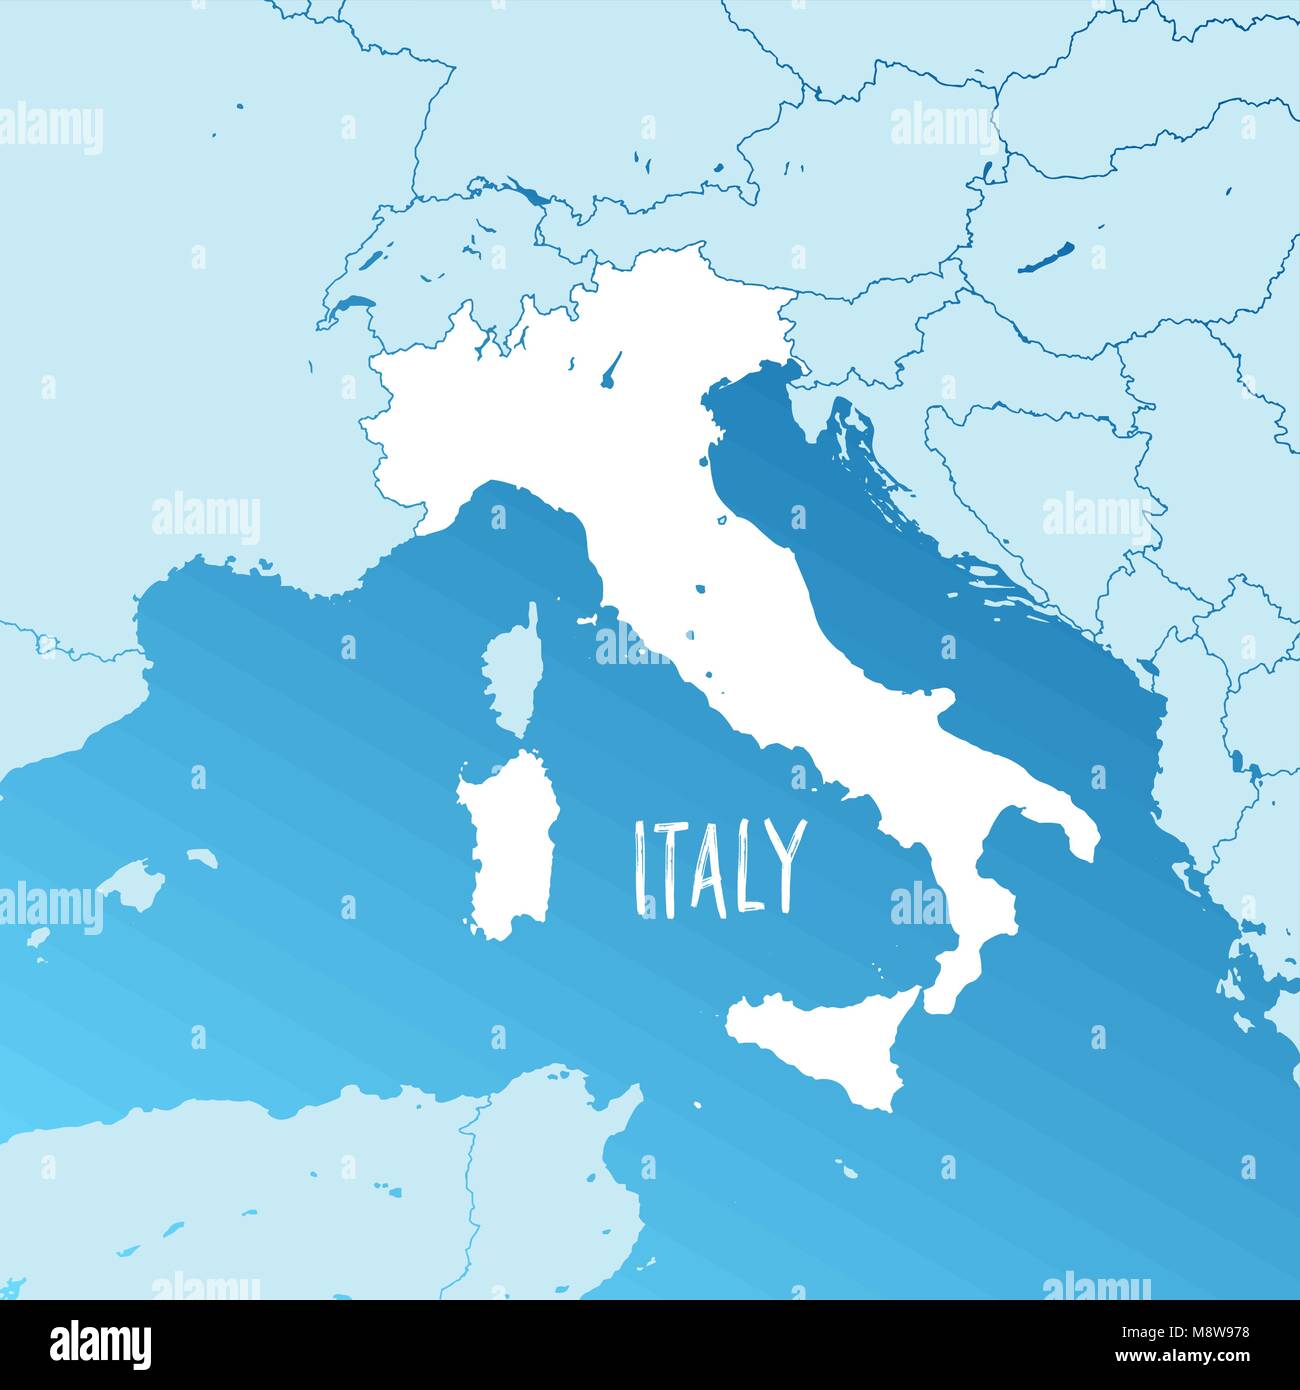 Italy Vector Map. Two-toned Silhouette Version. Rich details for borders, neighbours and islands. Usable for travel marketing, real estate and educati Stock Vector